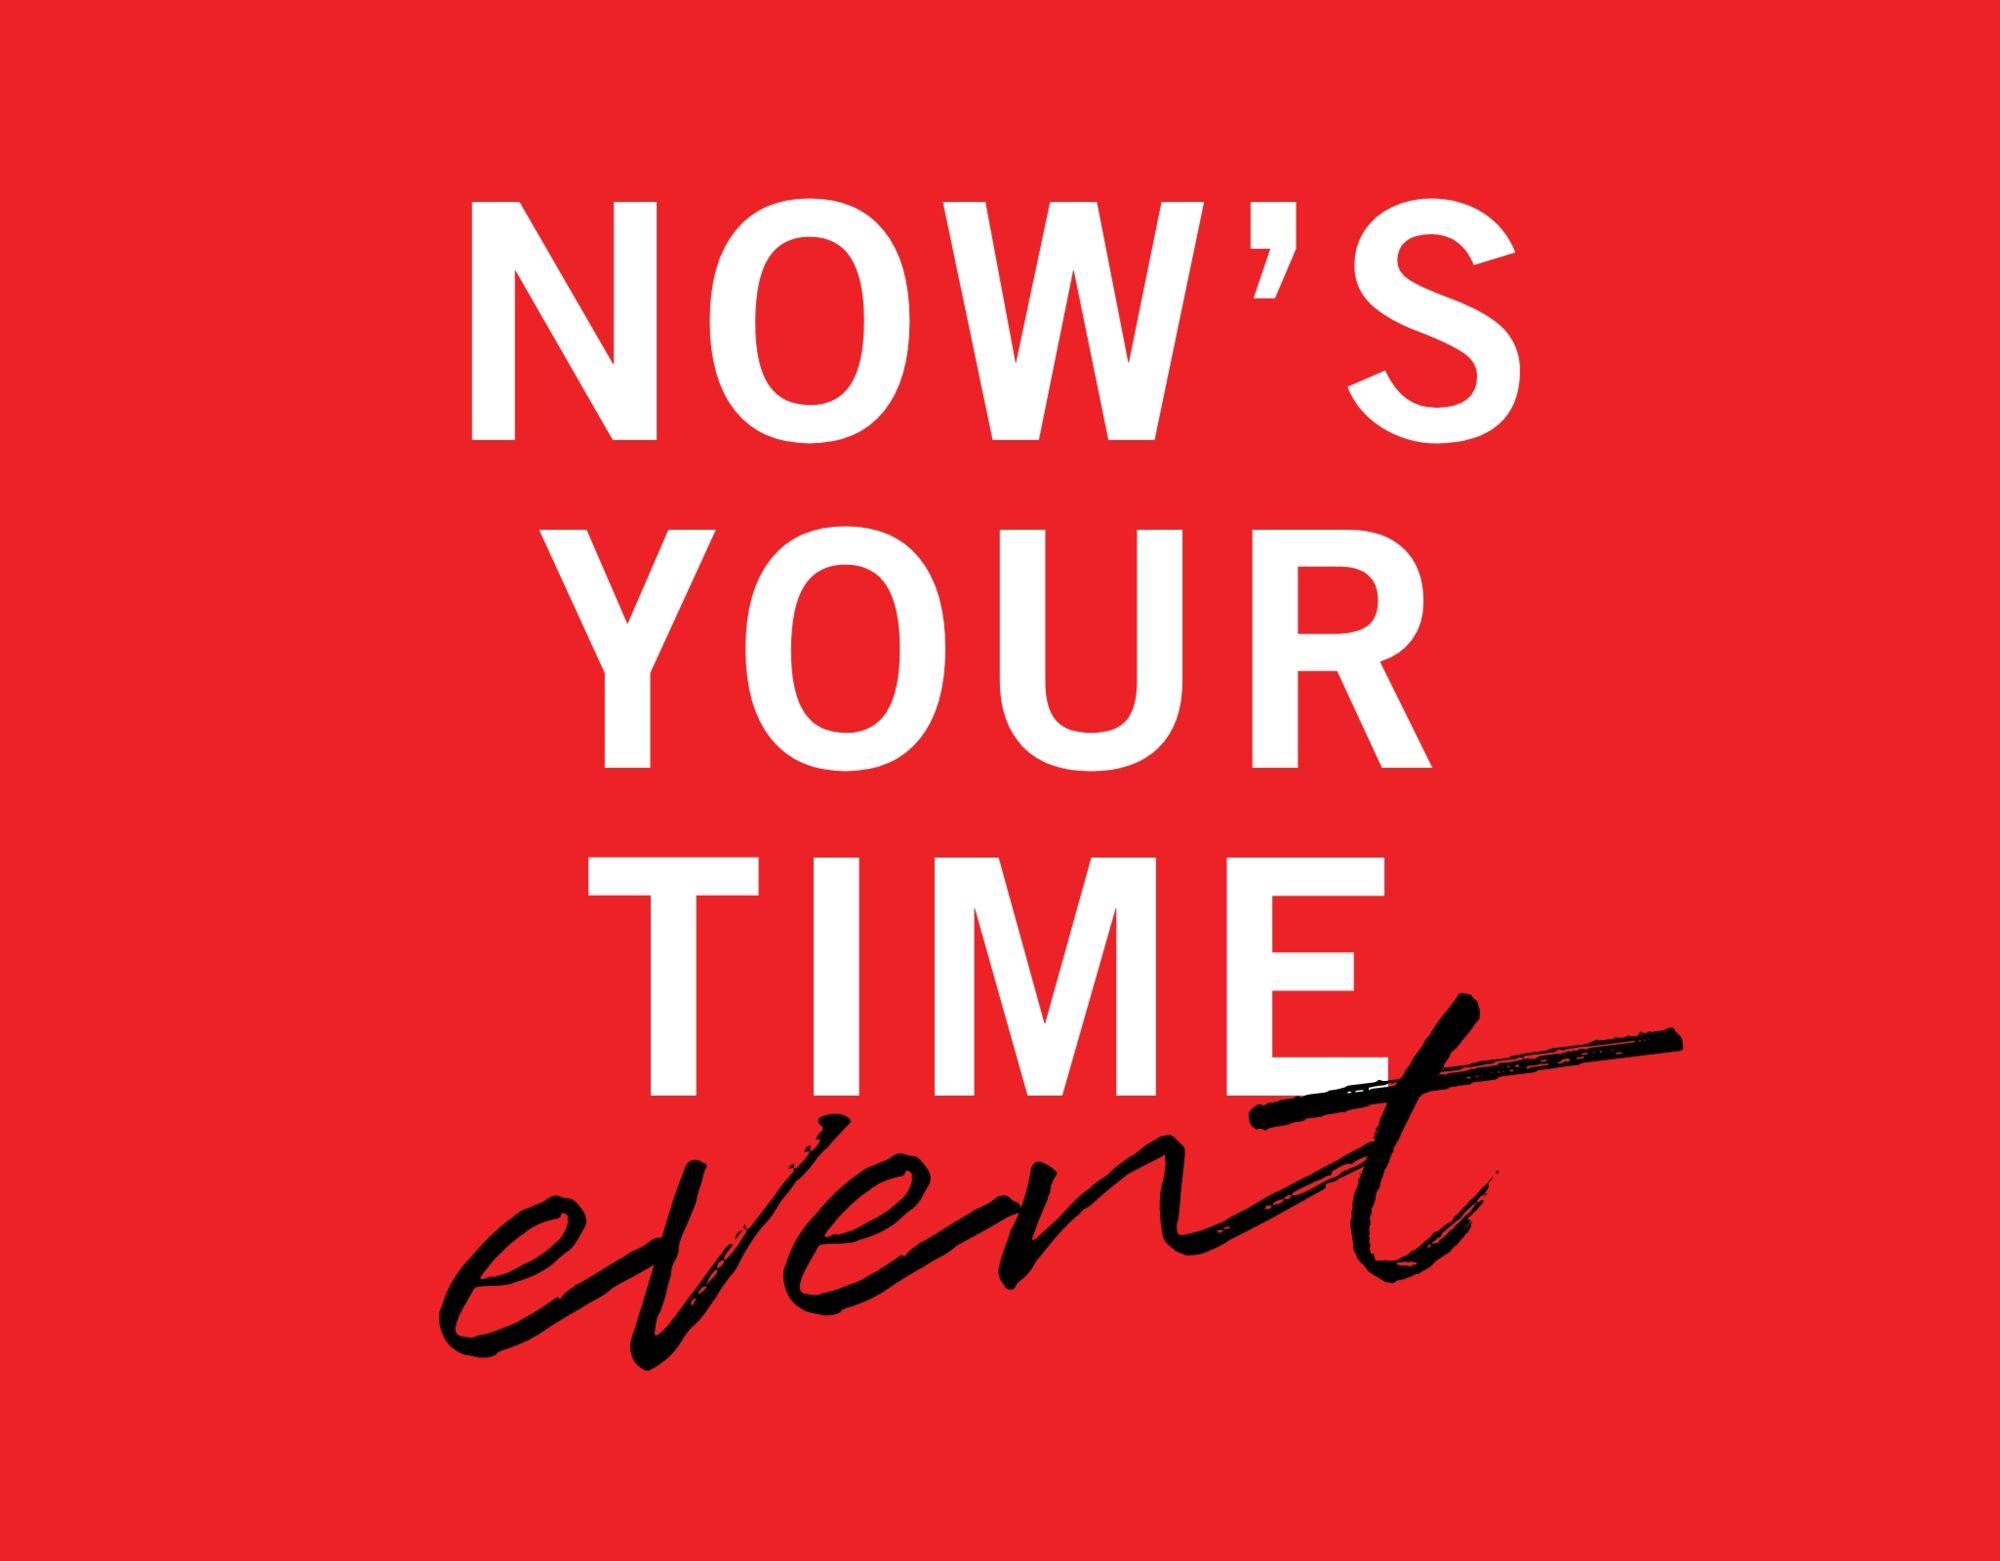 Now's your time event with a red background and white font, with black cursive font underneath showing the word 'event'.